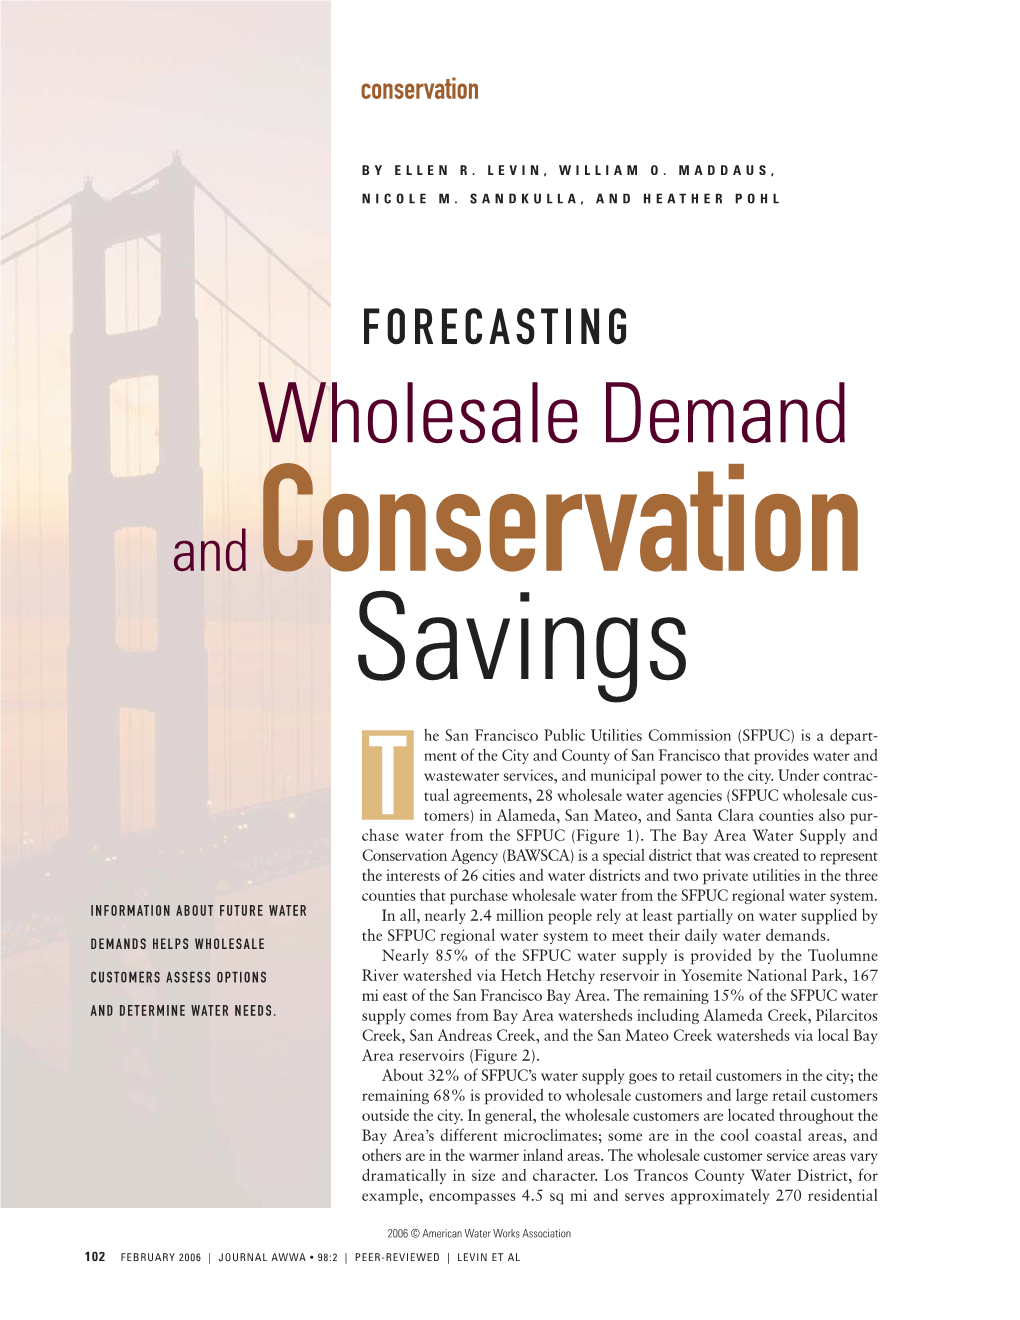 Wholesale Demand and Conservation Savings